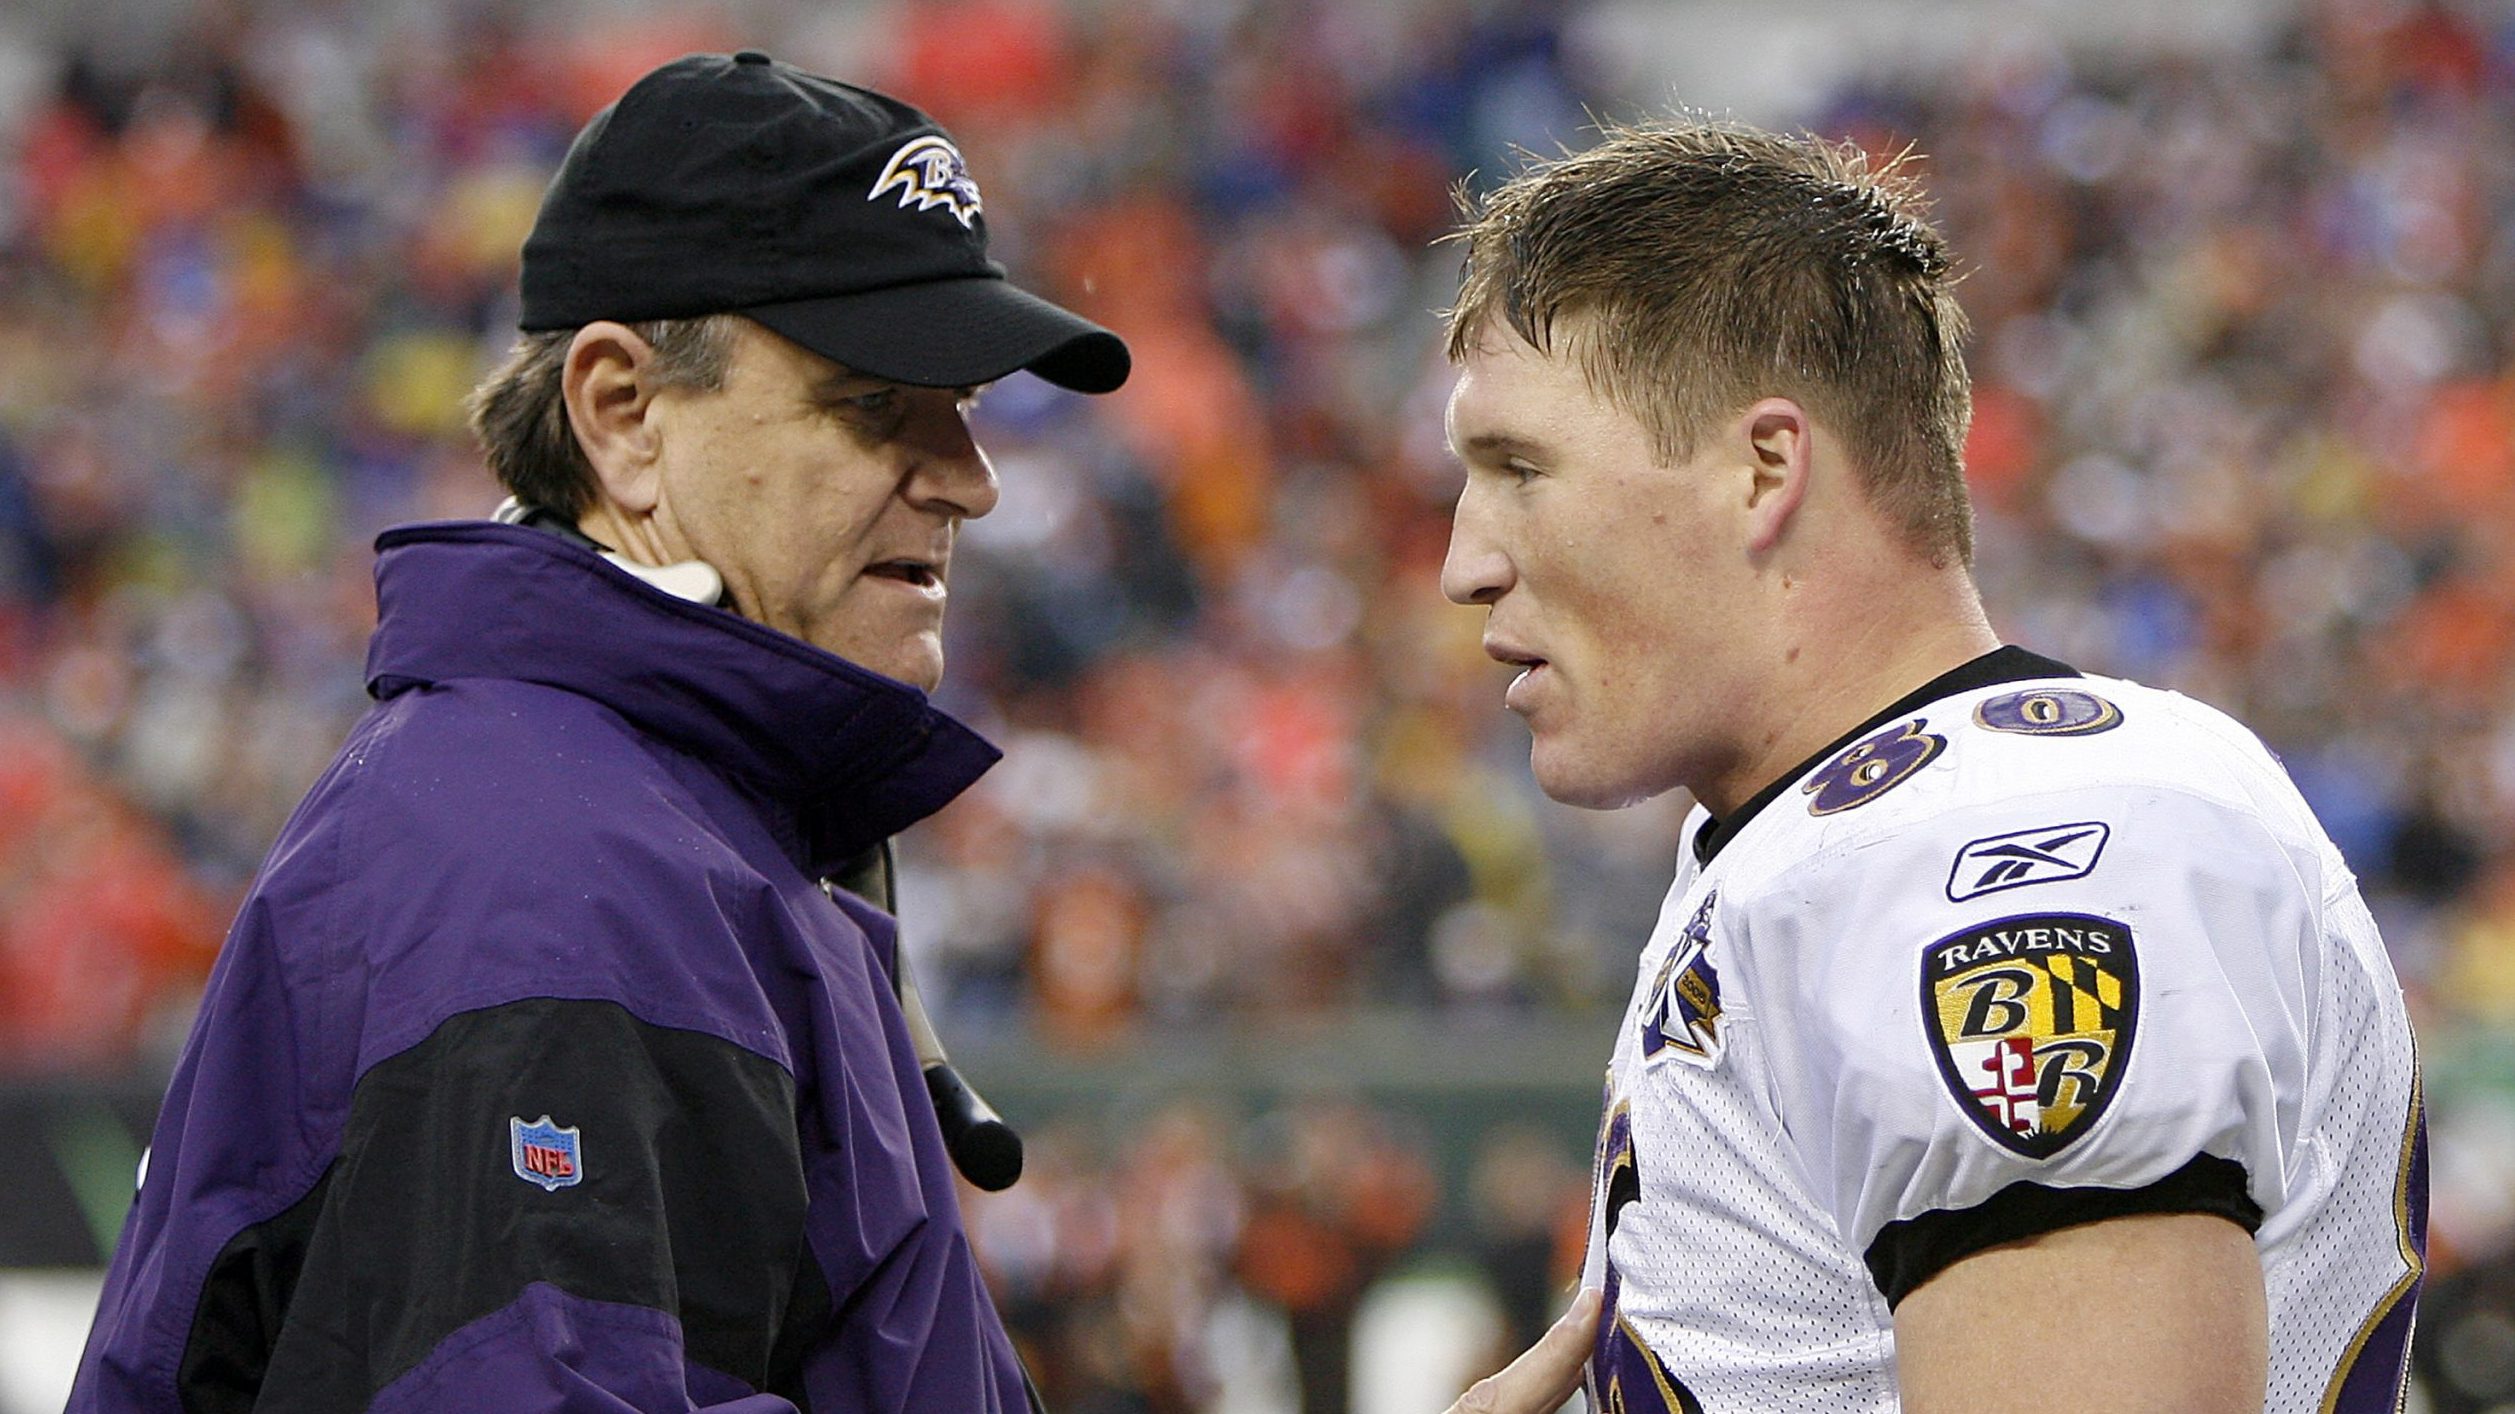 Baltimore head coach Brian Billick (left) talks to tight end Todd Heap after Heap pulled in the fir...